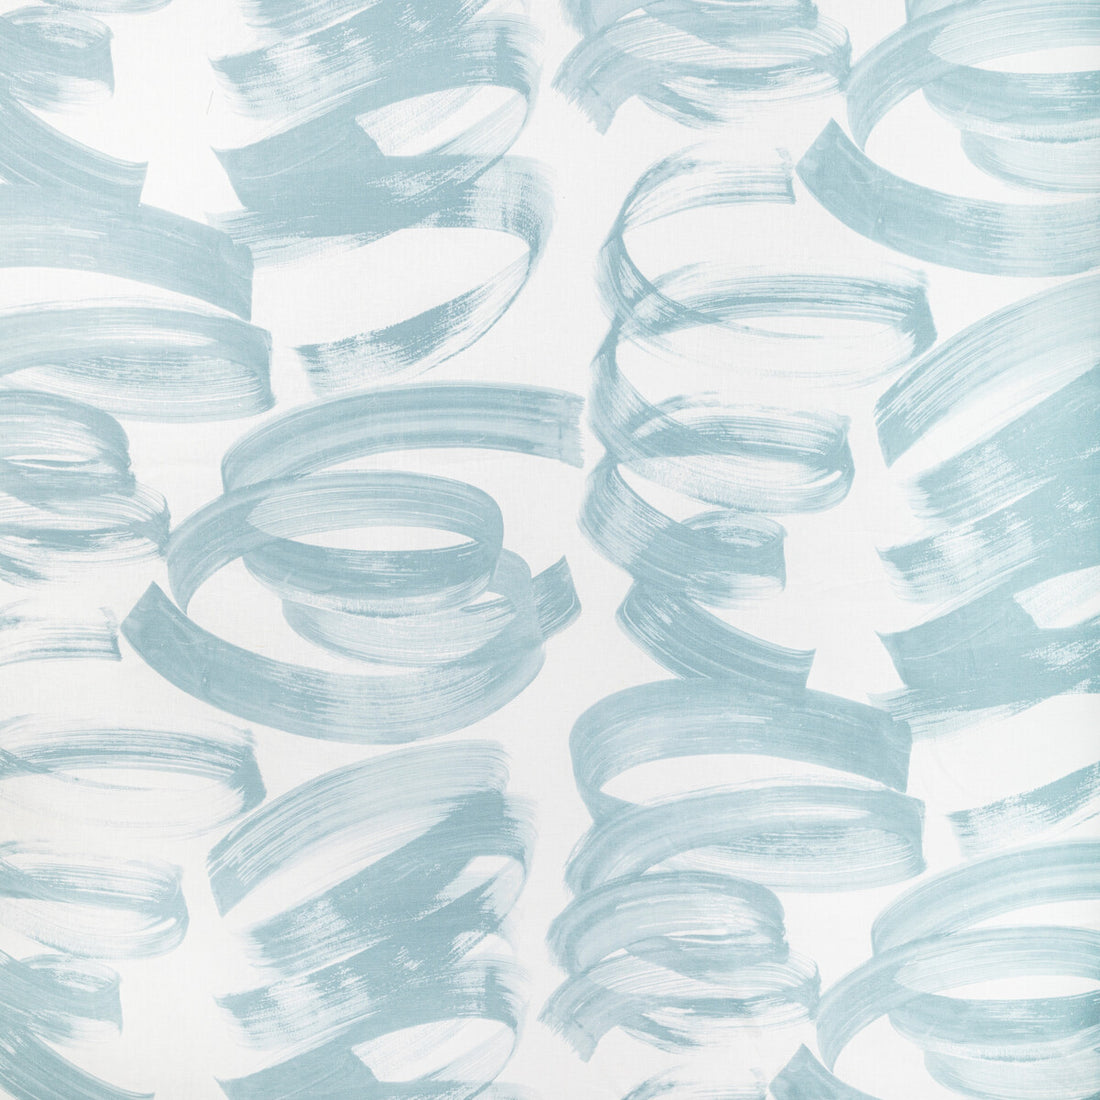 Laryo Print fabric in sky color - pattern GWF-3773.15.0 - by Lee Jofa Modern in the Rhapsody collection